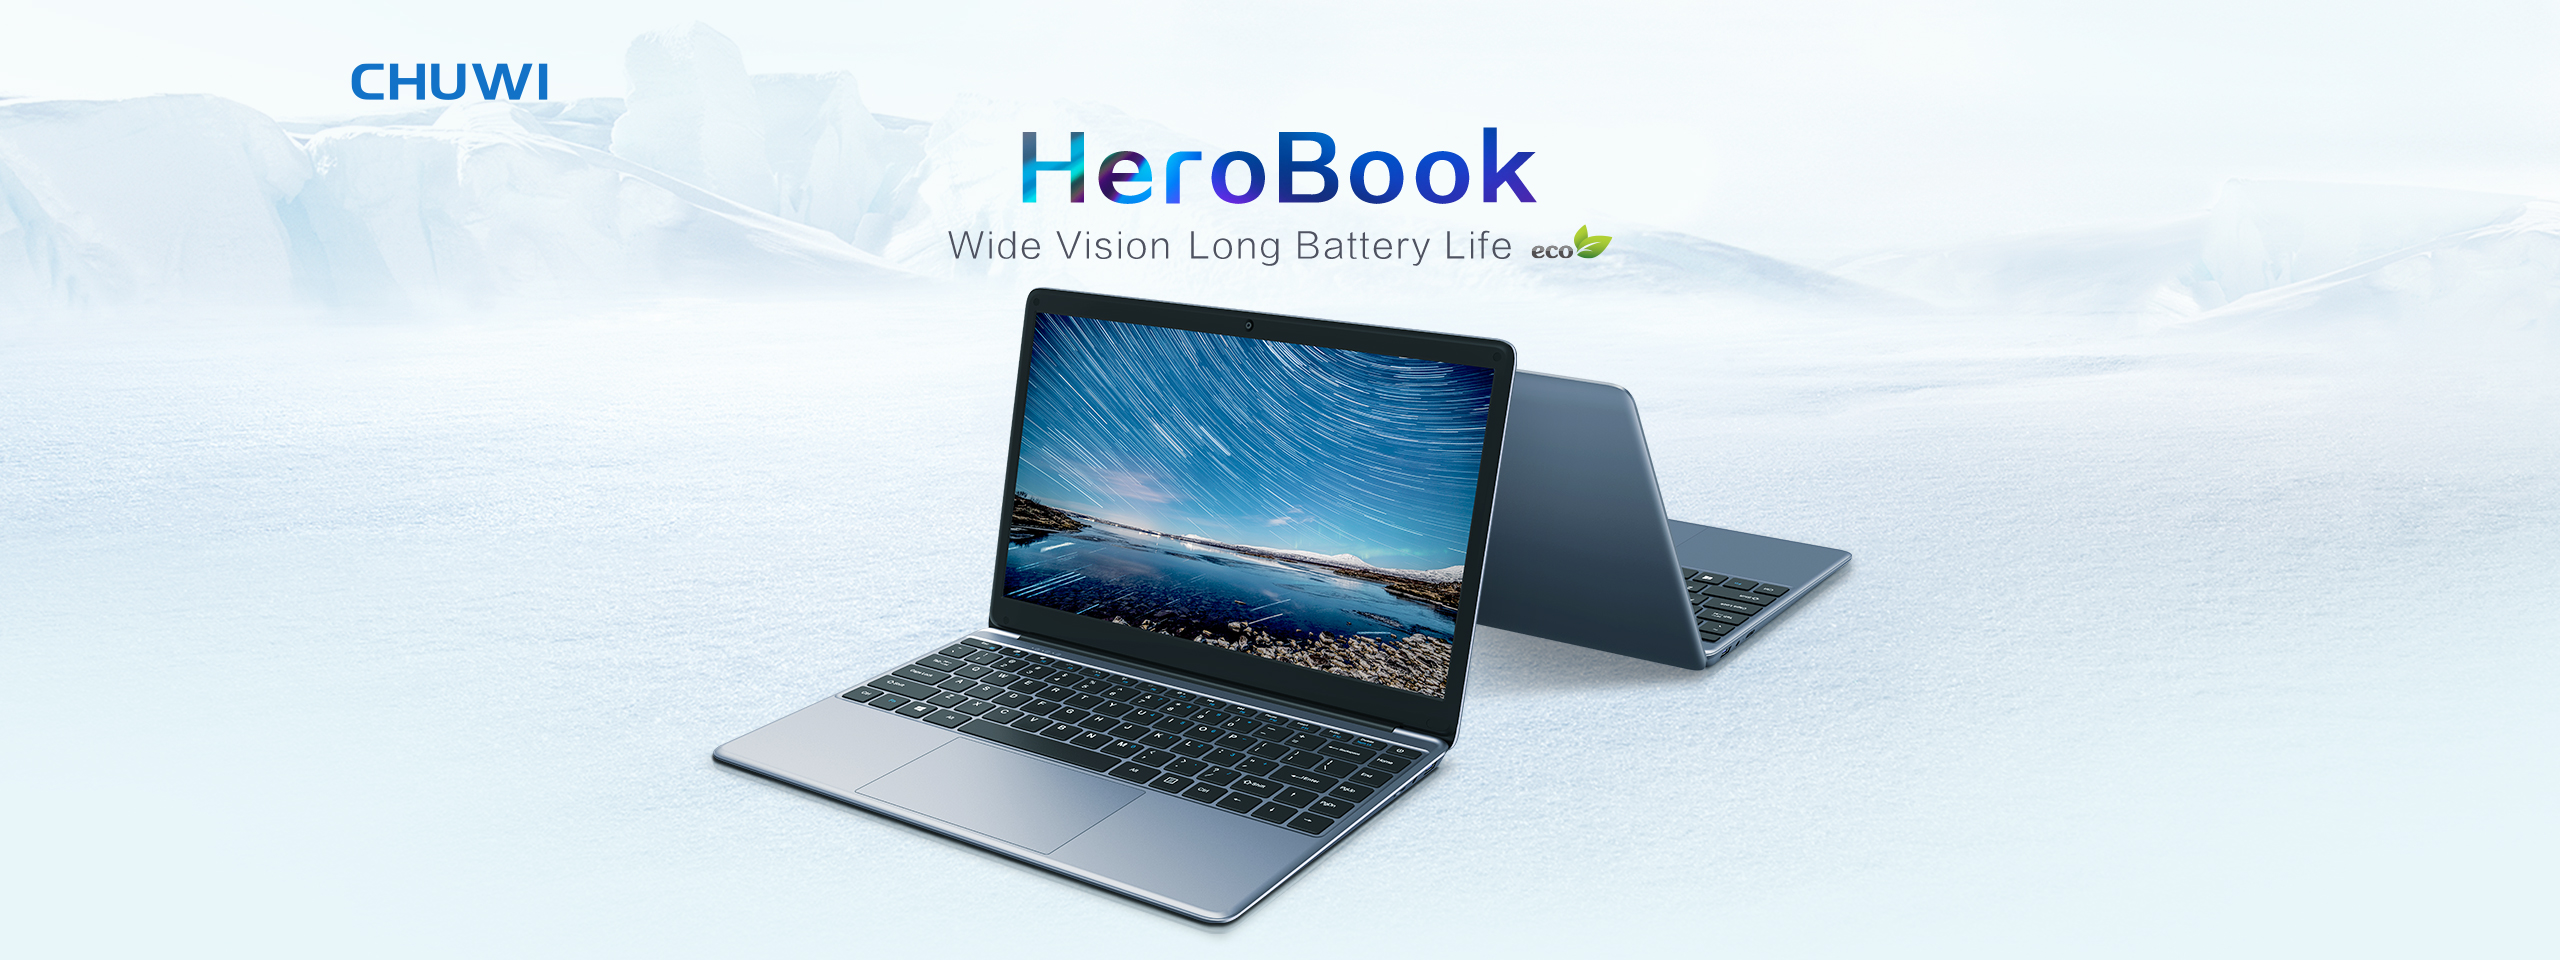 PC/タブレット ノートPC HeroBook-Laptop-Products-Chuwi Official -Laptop, Android/Windows 